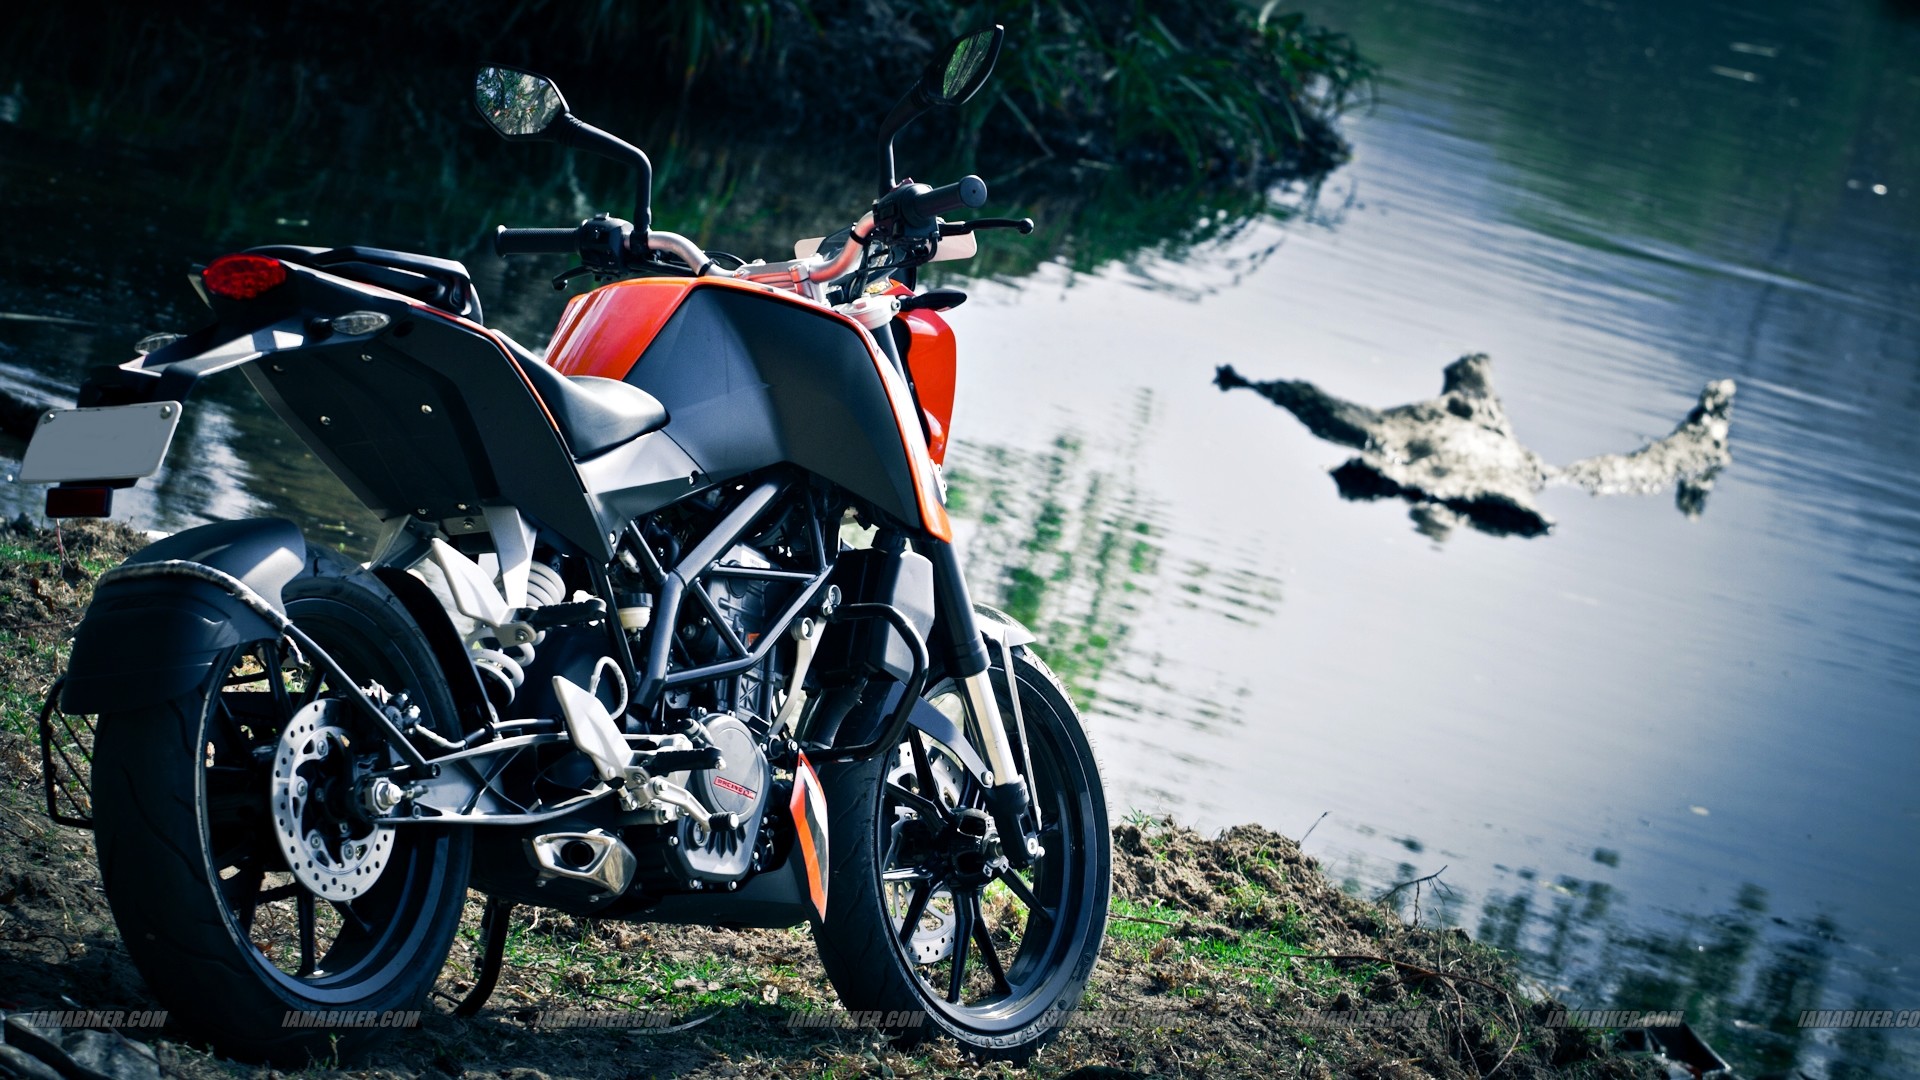 1920x1080 KTM Duke 200 HD wallpaper gallery Click on picture to see high 